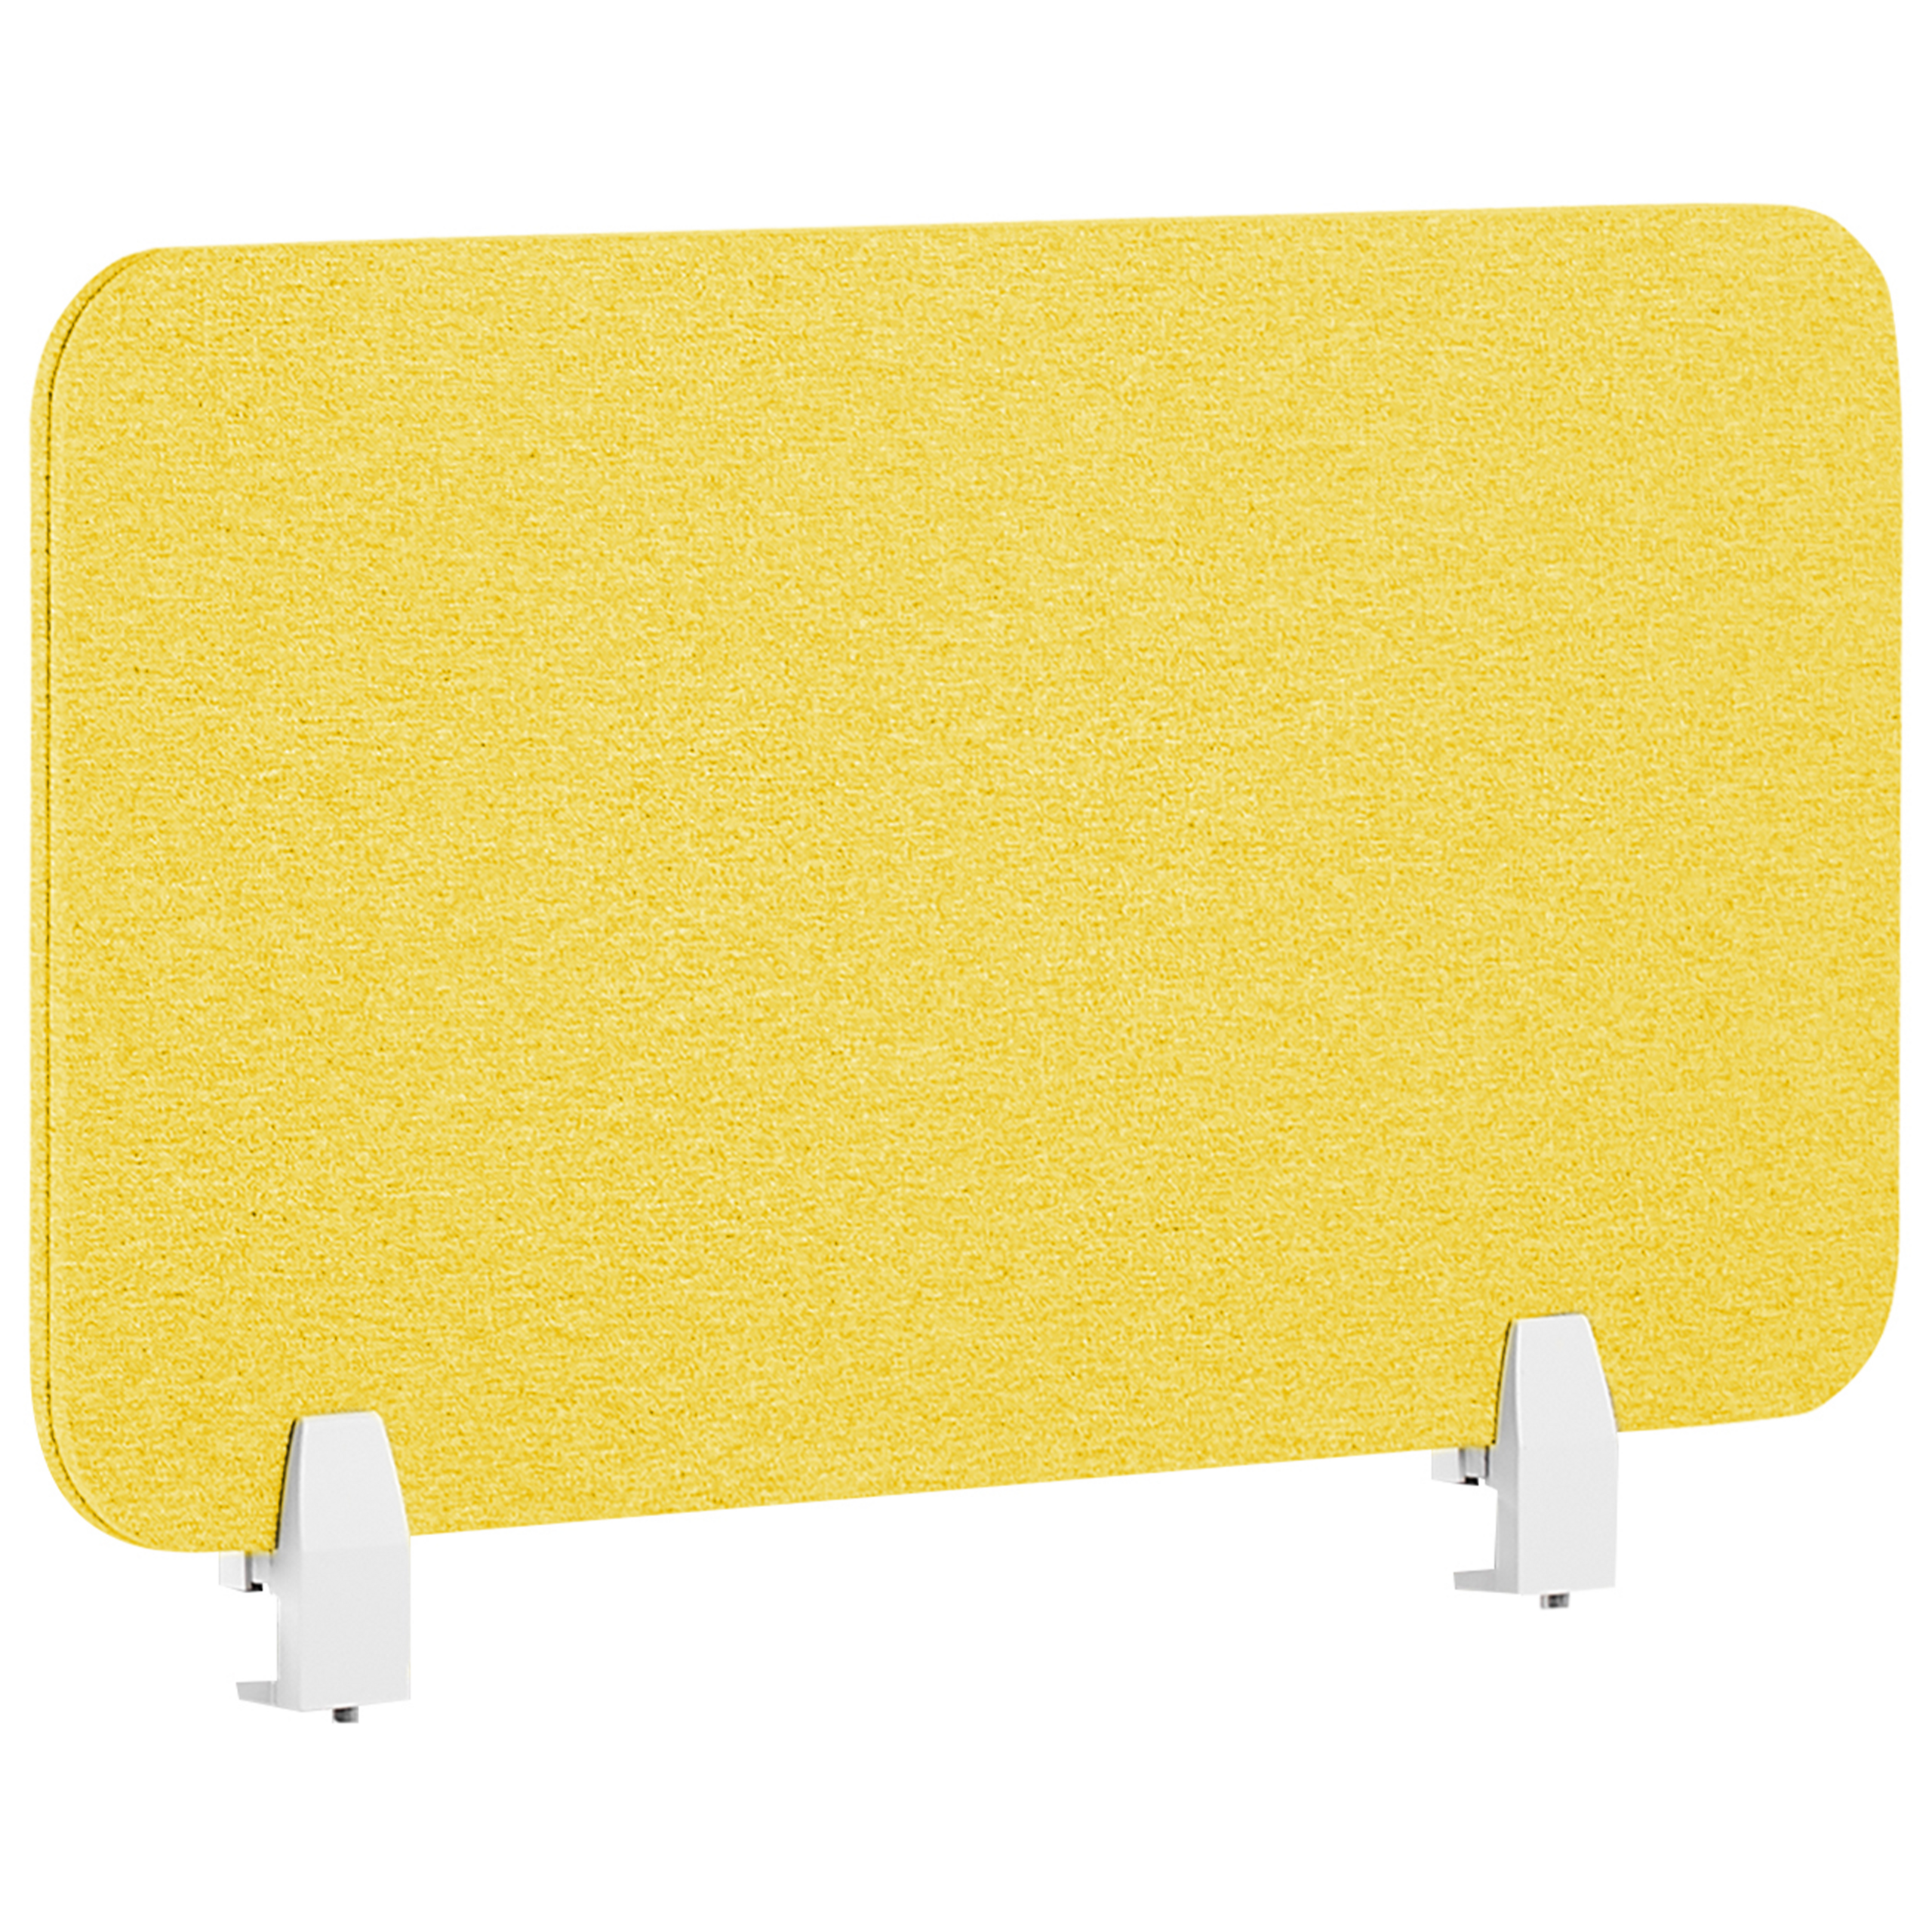 Beliani Desk Screen Yellow PET Board Fabric Cover 80 x 40 cm Acoustic Screen Modular Mounting Clamps Home Office Material:Polyester Size:2x40x80